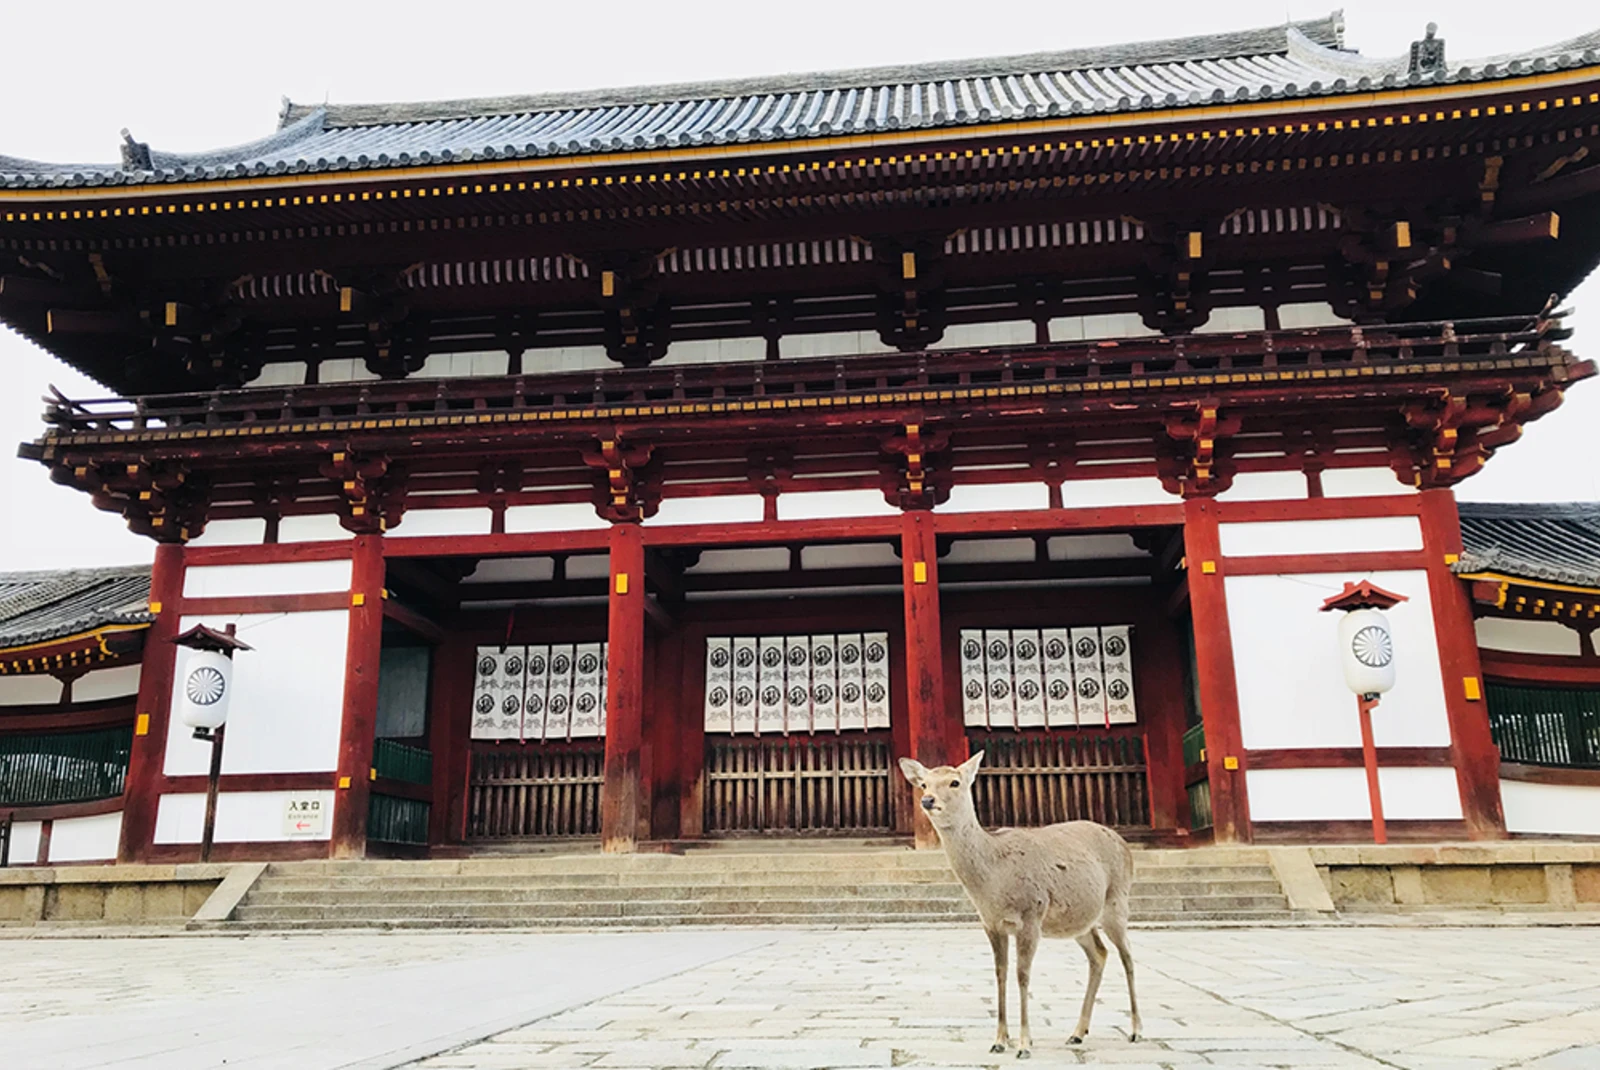 deer in front of red and white Japanese temple with black and golf roof